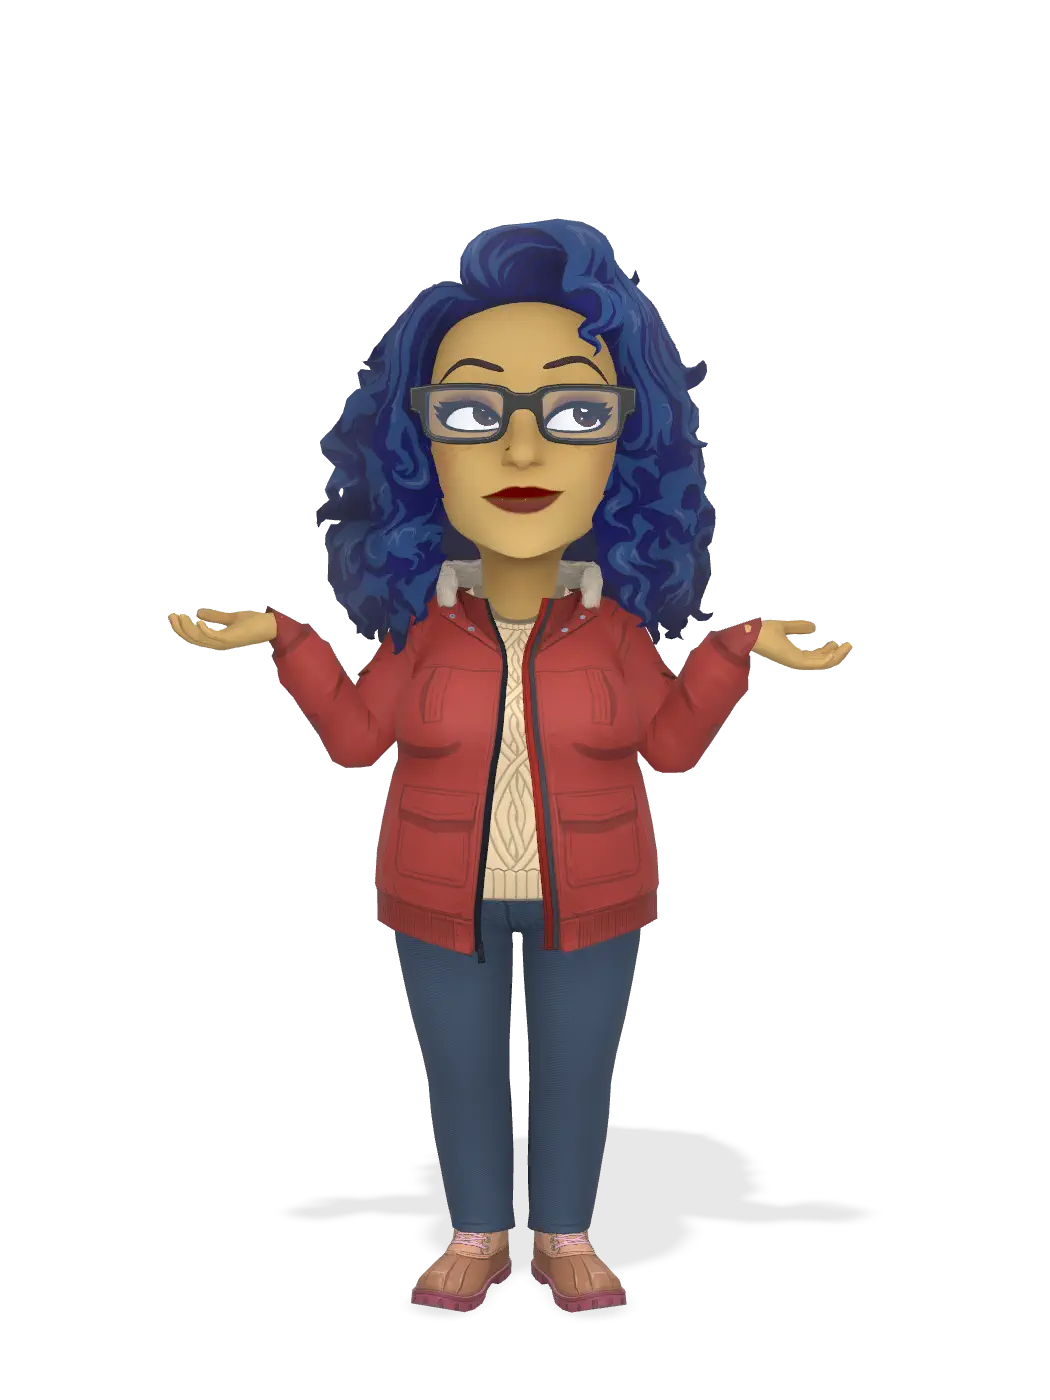 3D Bitmoji for royally_yours